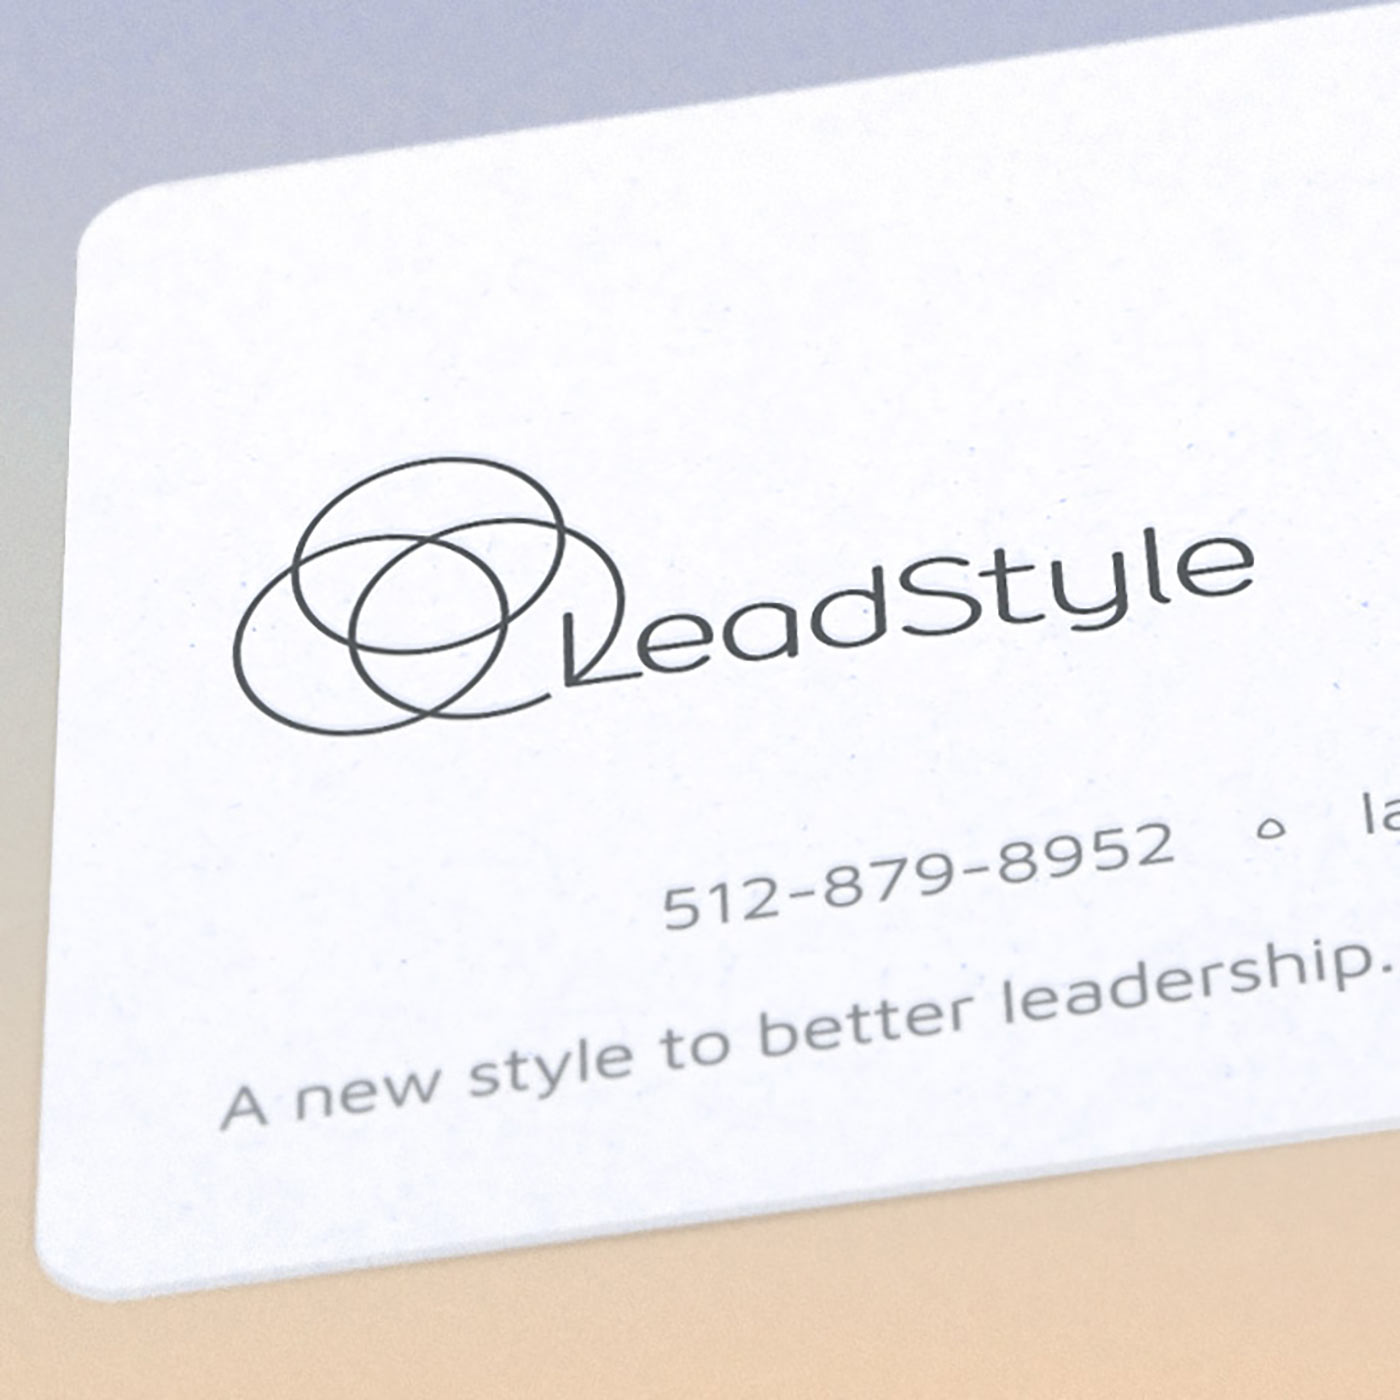 LeadStyle logo